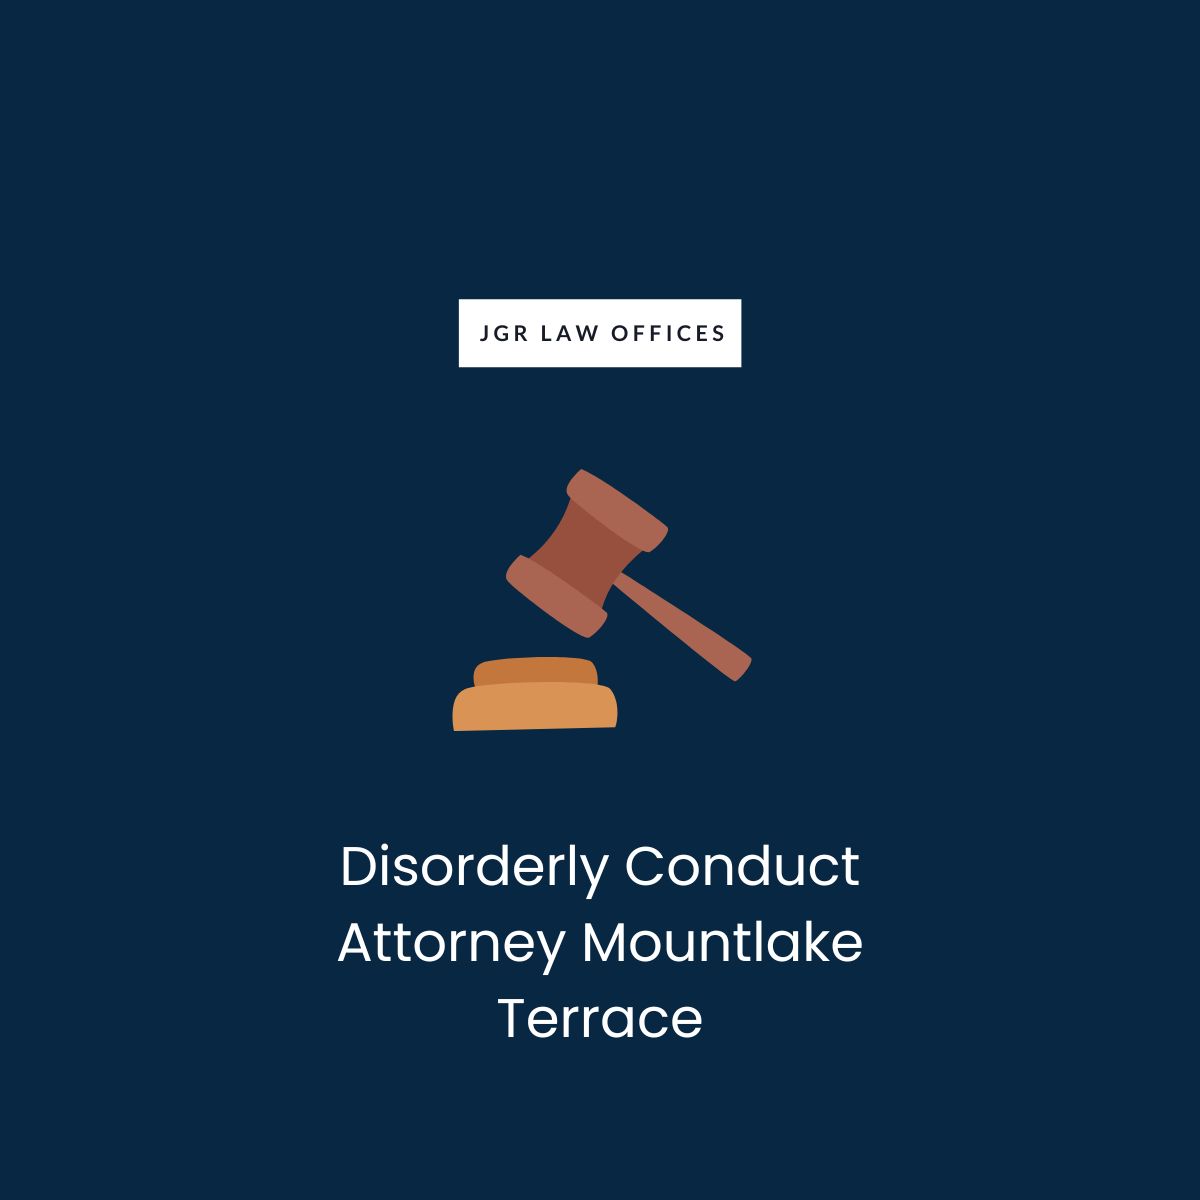 Disorderly Conduct Attorney Mountlake Terrace